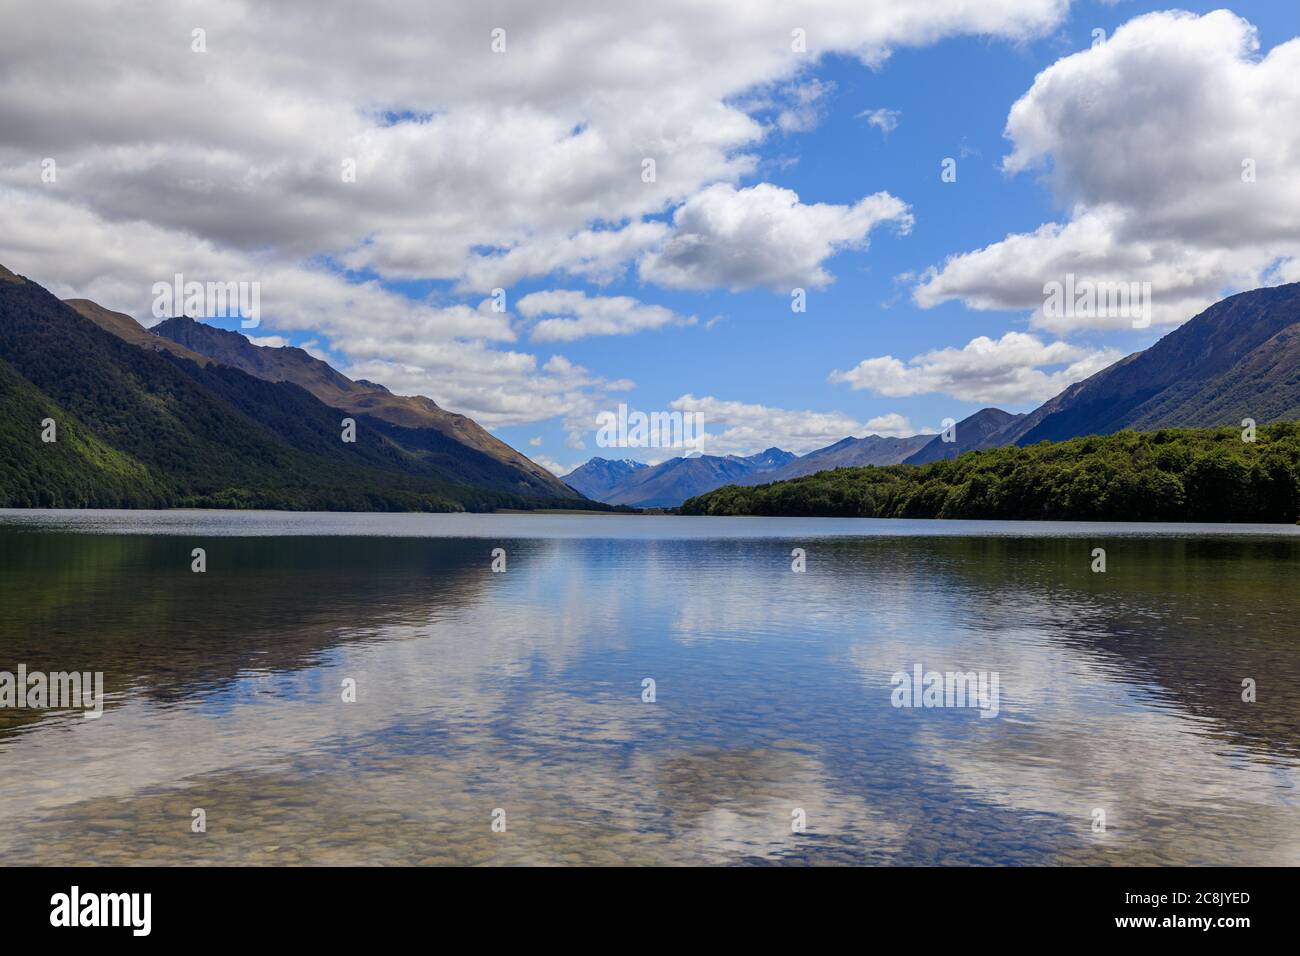 The calm waters of South Mavora Lake with forested mountains down each side and mountains in the distance. White Fluffy clouds on a blue sky. Stock Photo